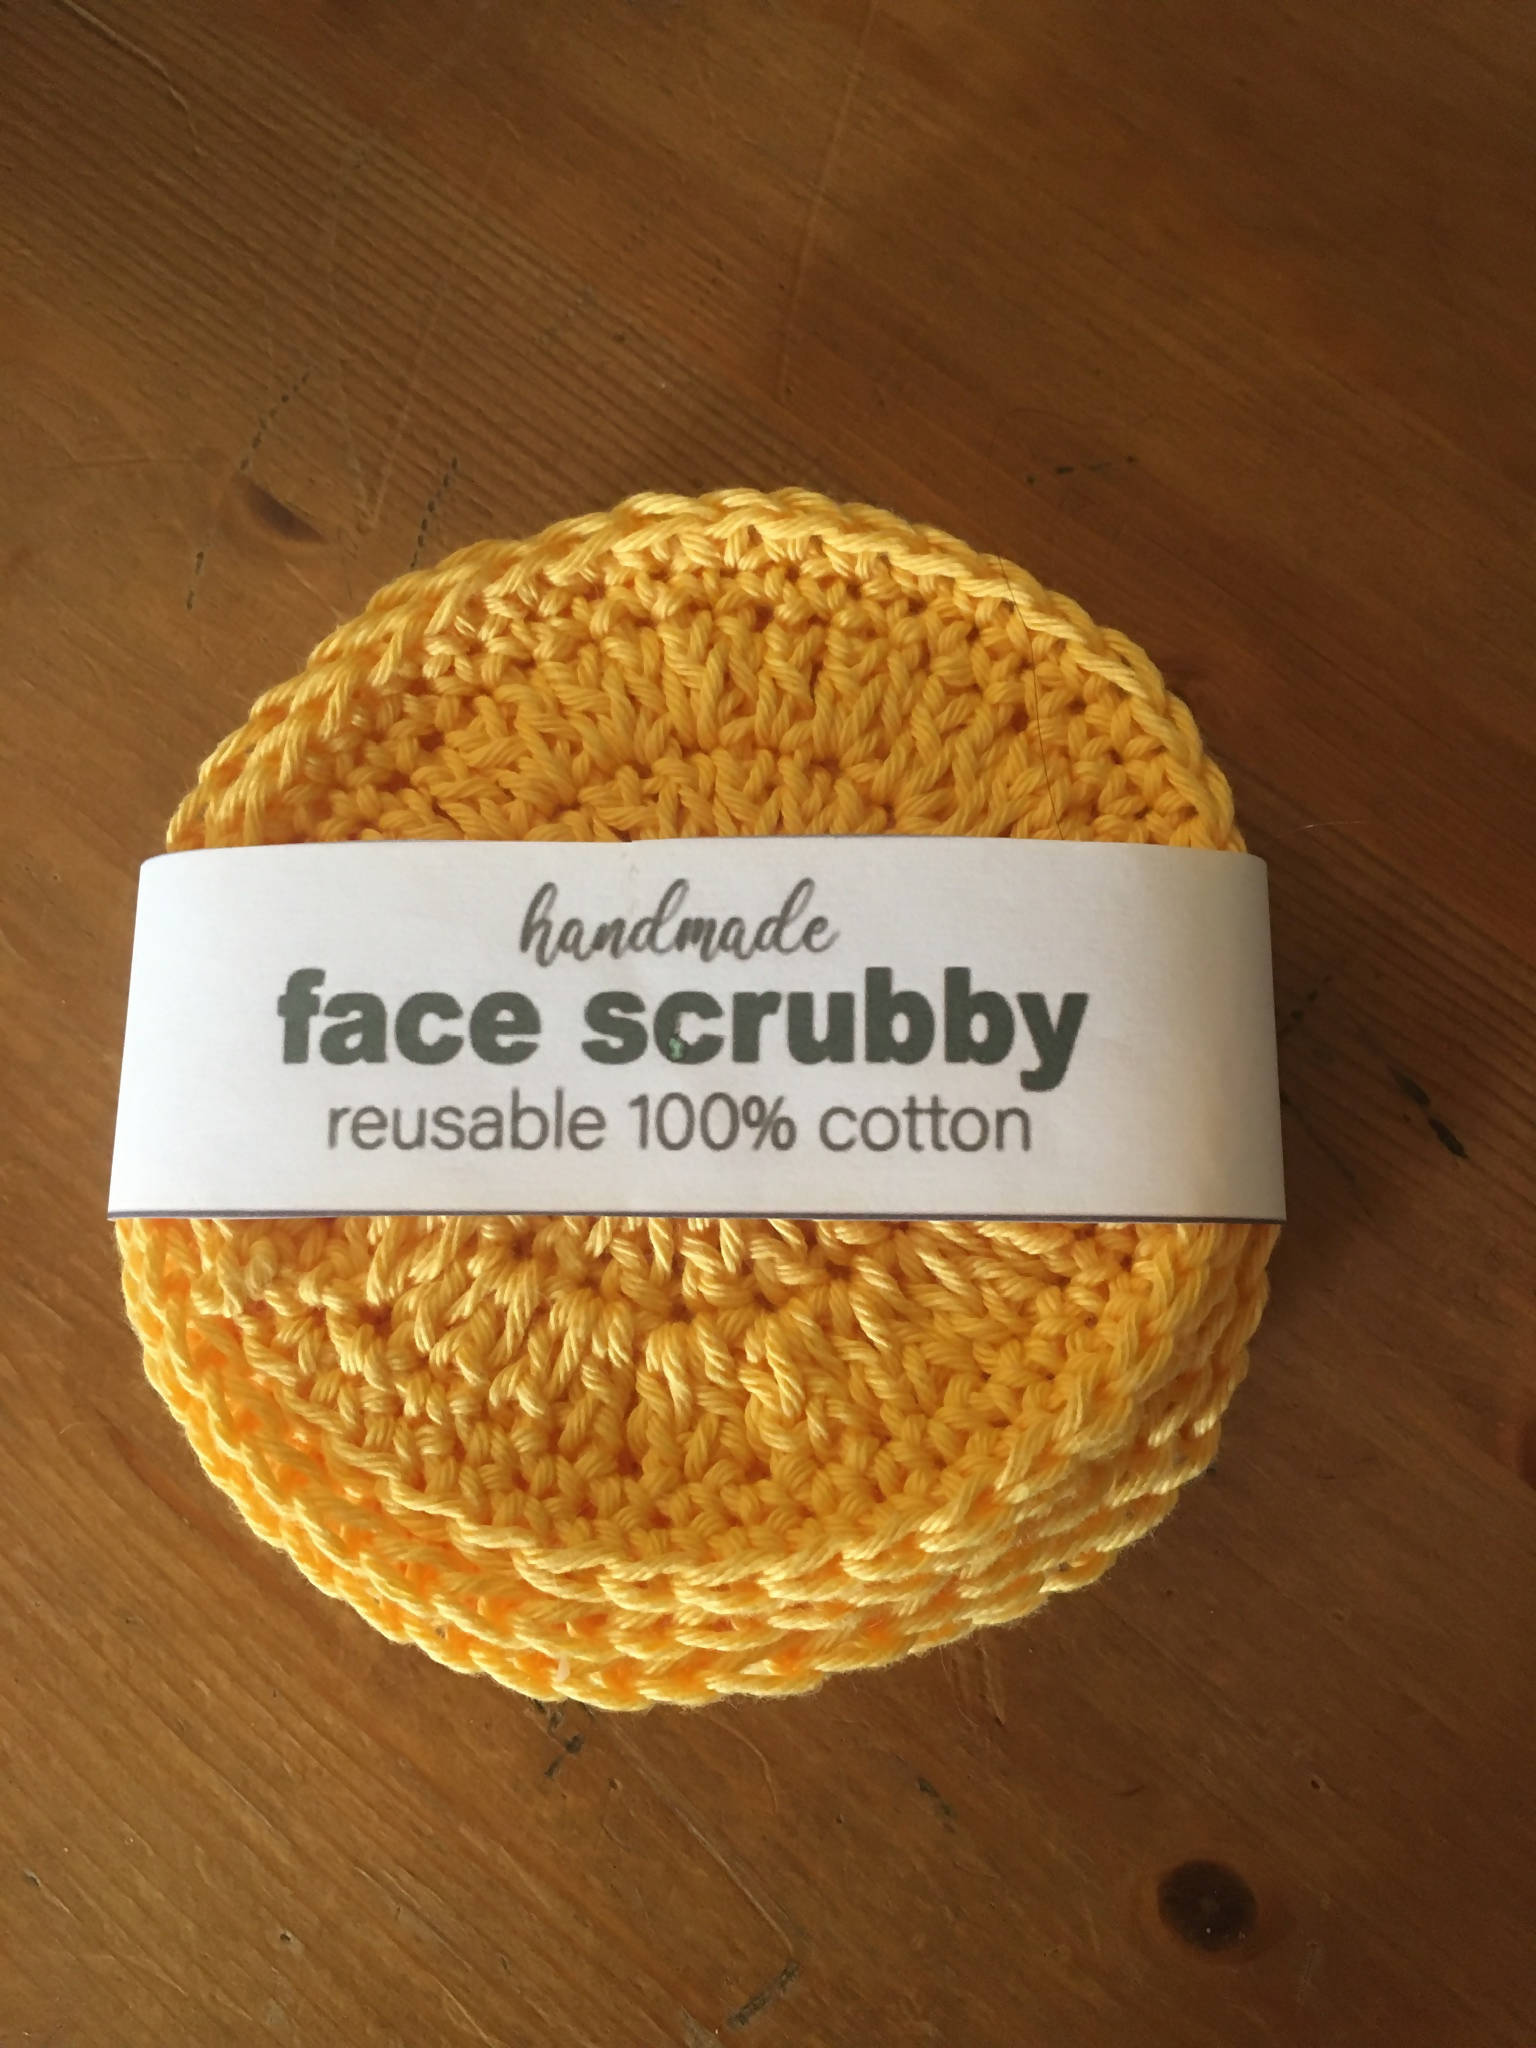 Crocheted face scrubbies